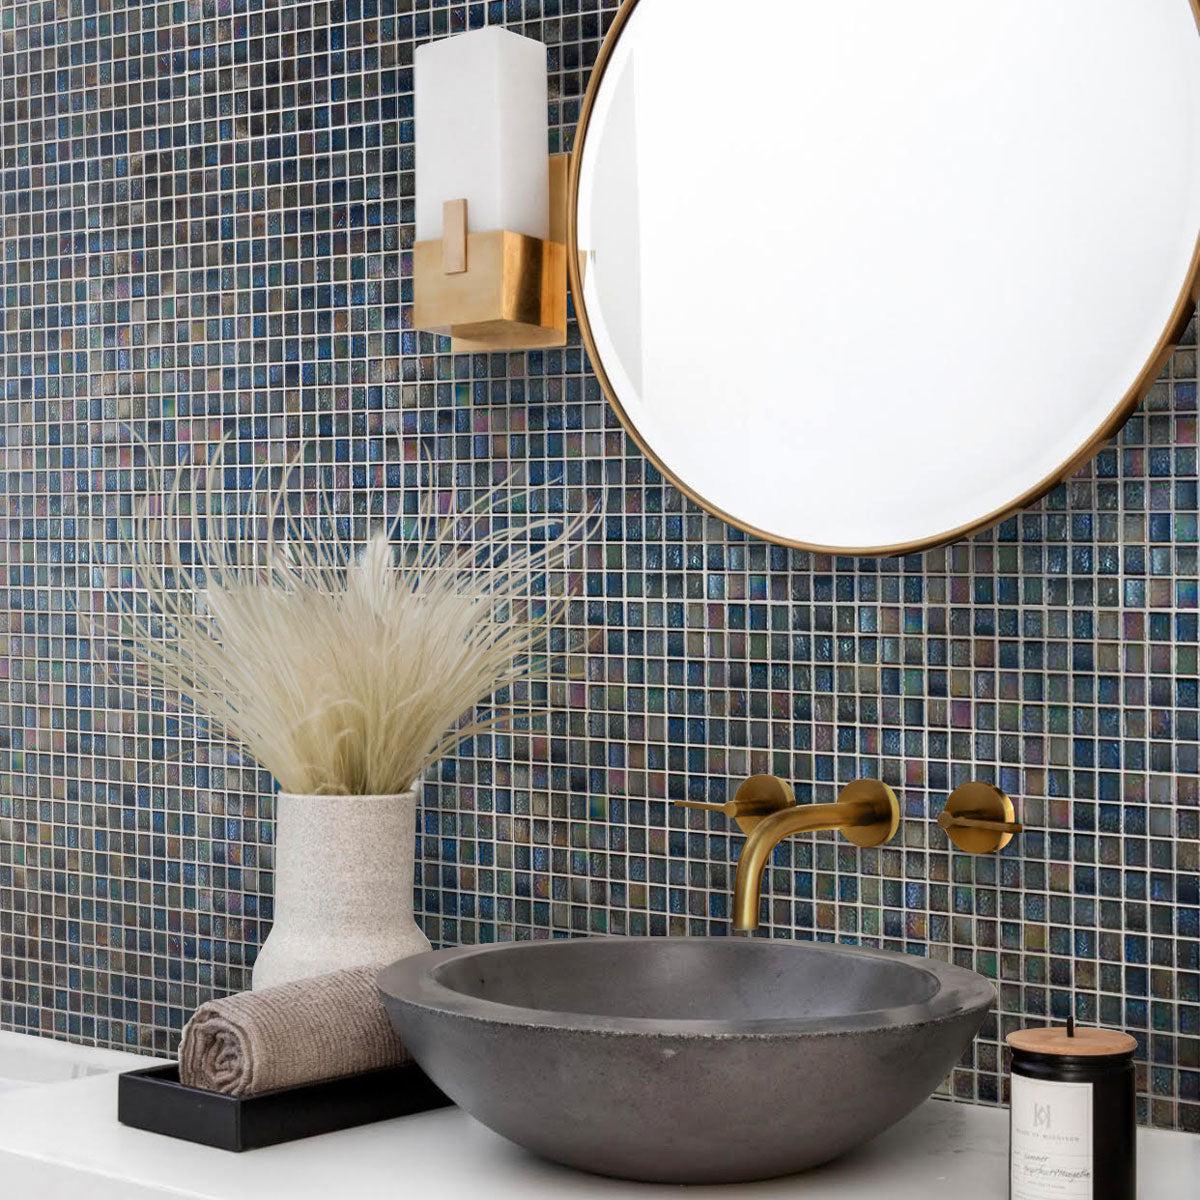 Metallic Deep Blue Foiled Squares Glass Tile adds a luxurious and sophisticated touch